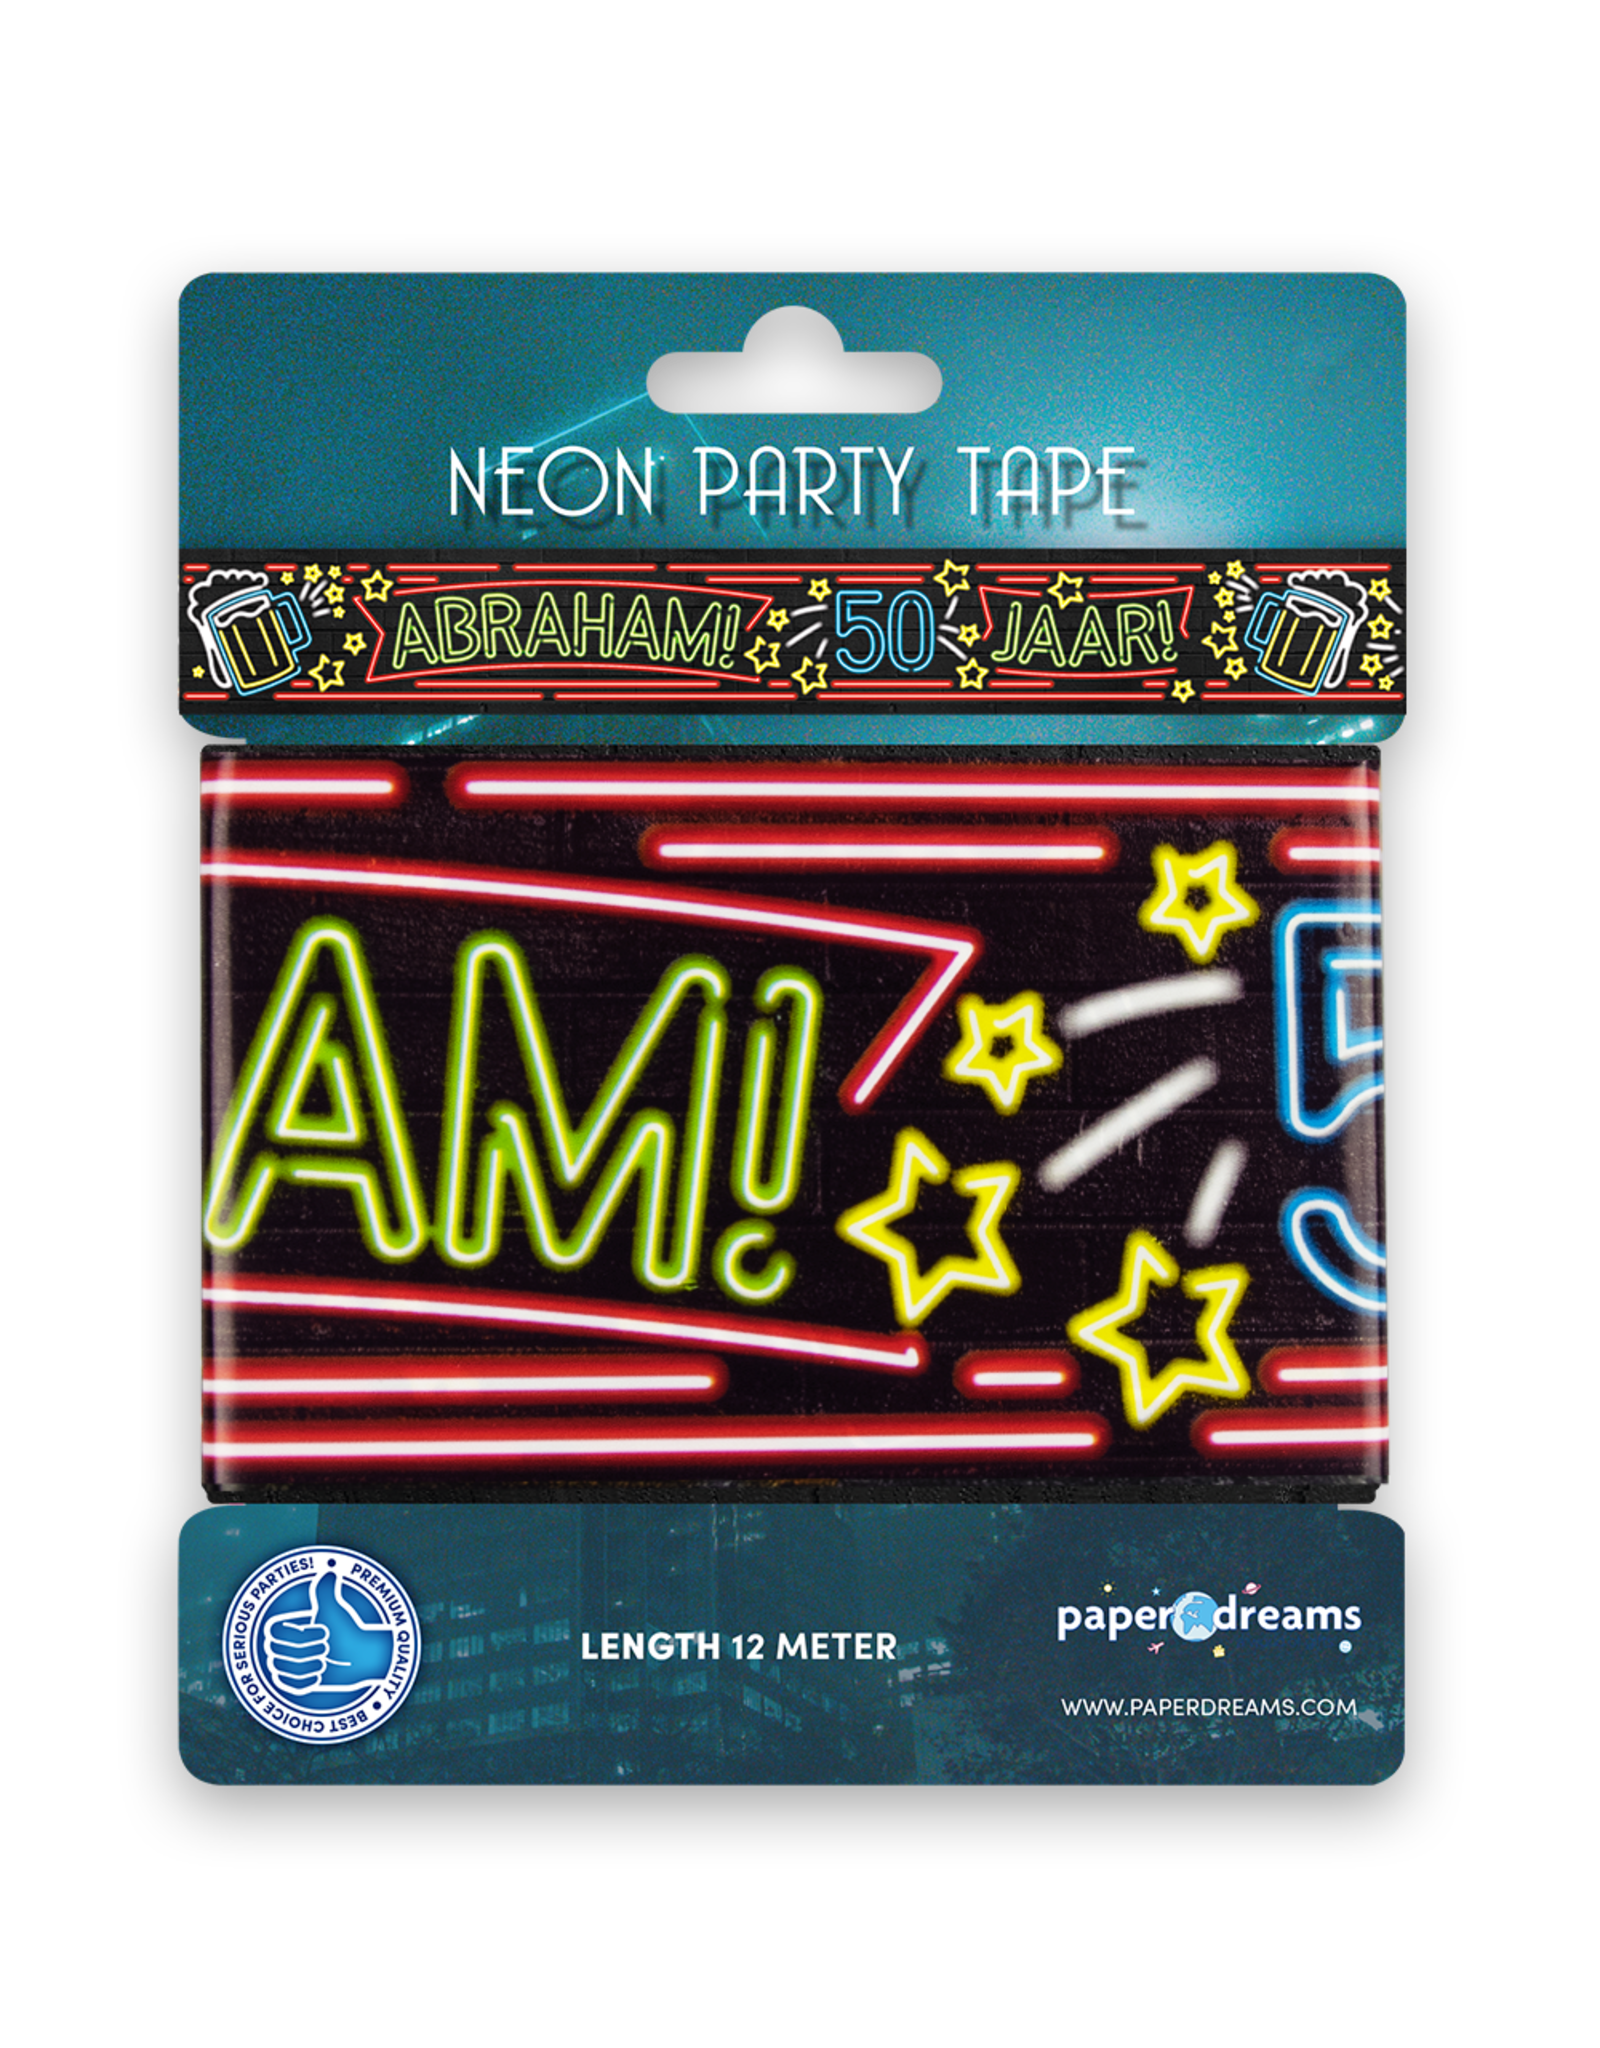 Neon Party Tape - Abraham 50